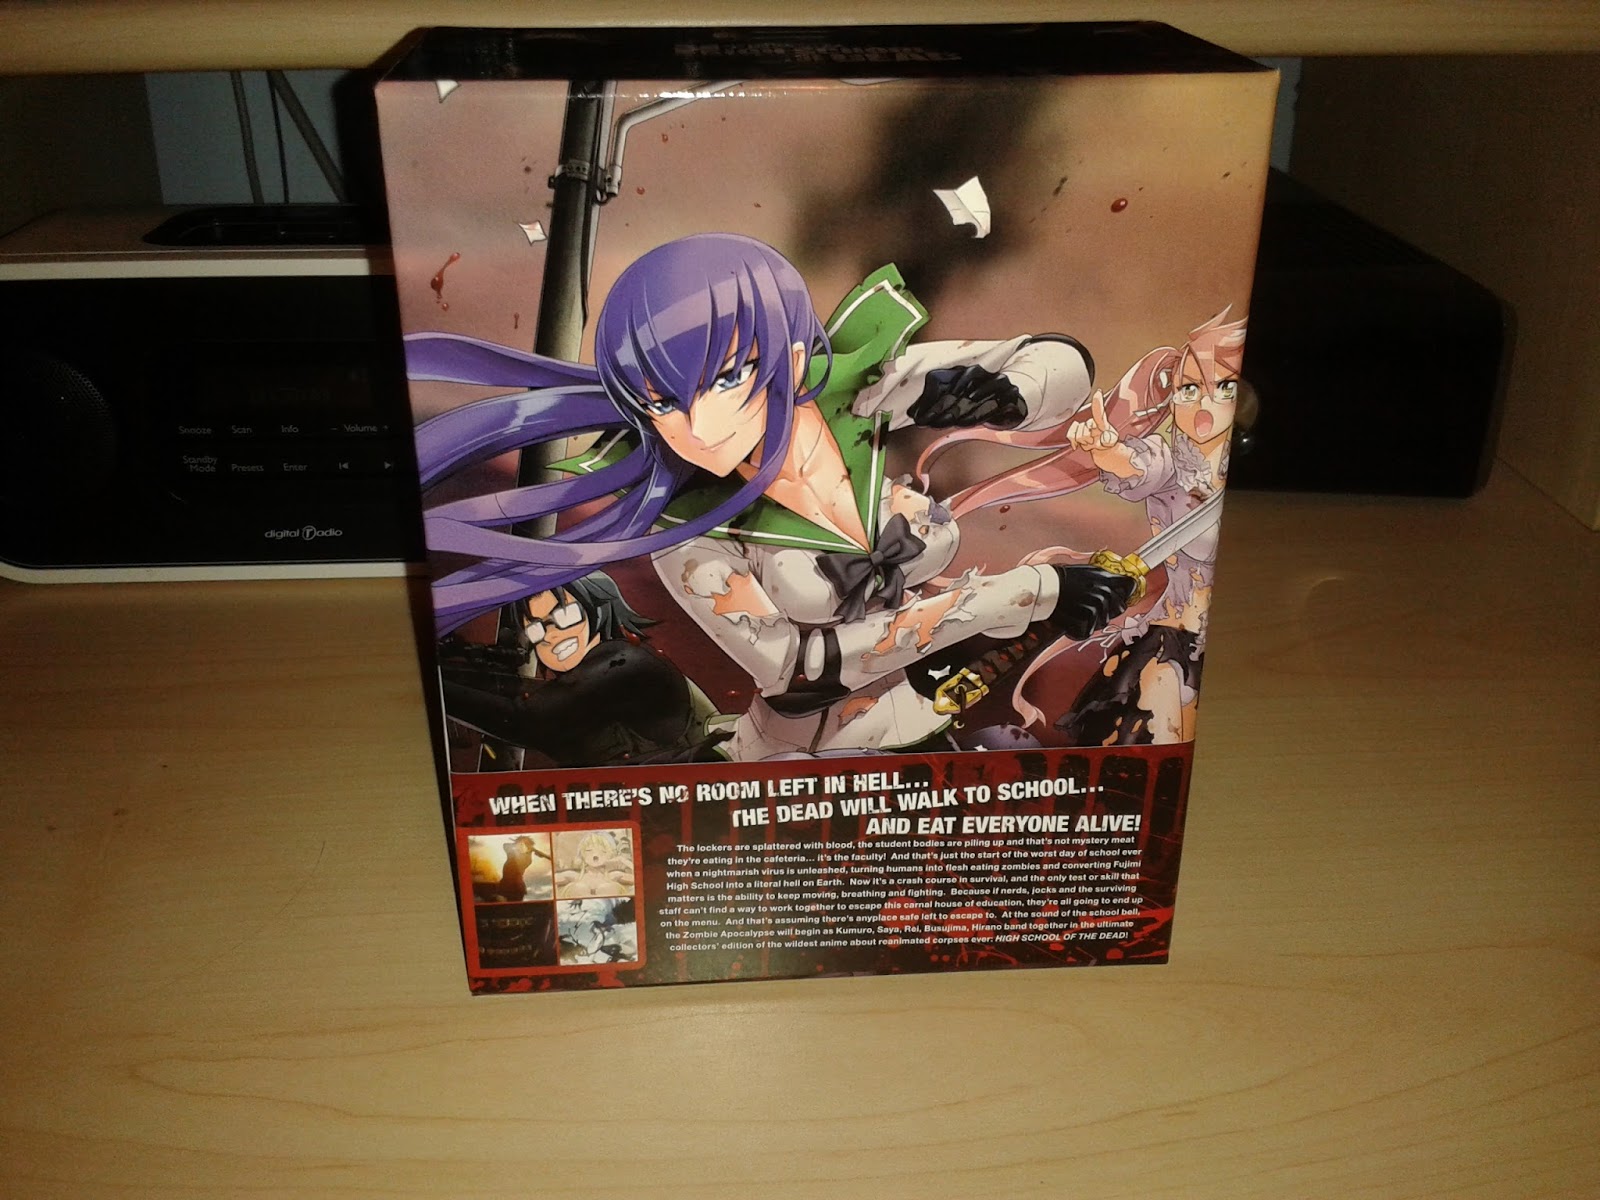 The Normanic Vault: Unboxing [UK]: Highschool of the Dead